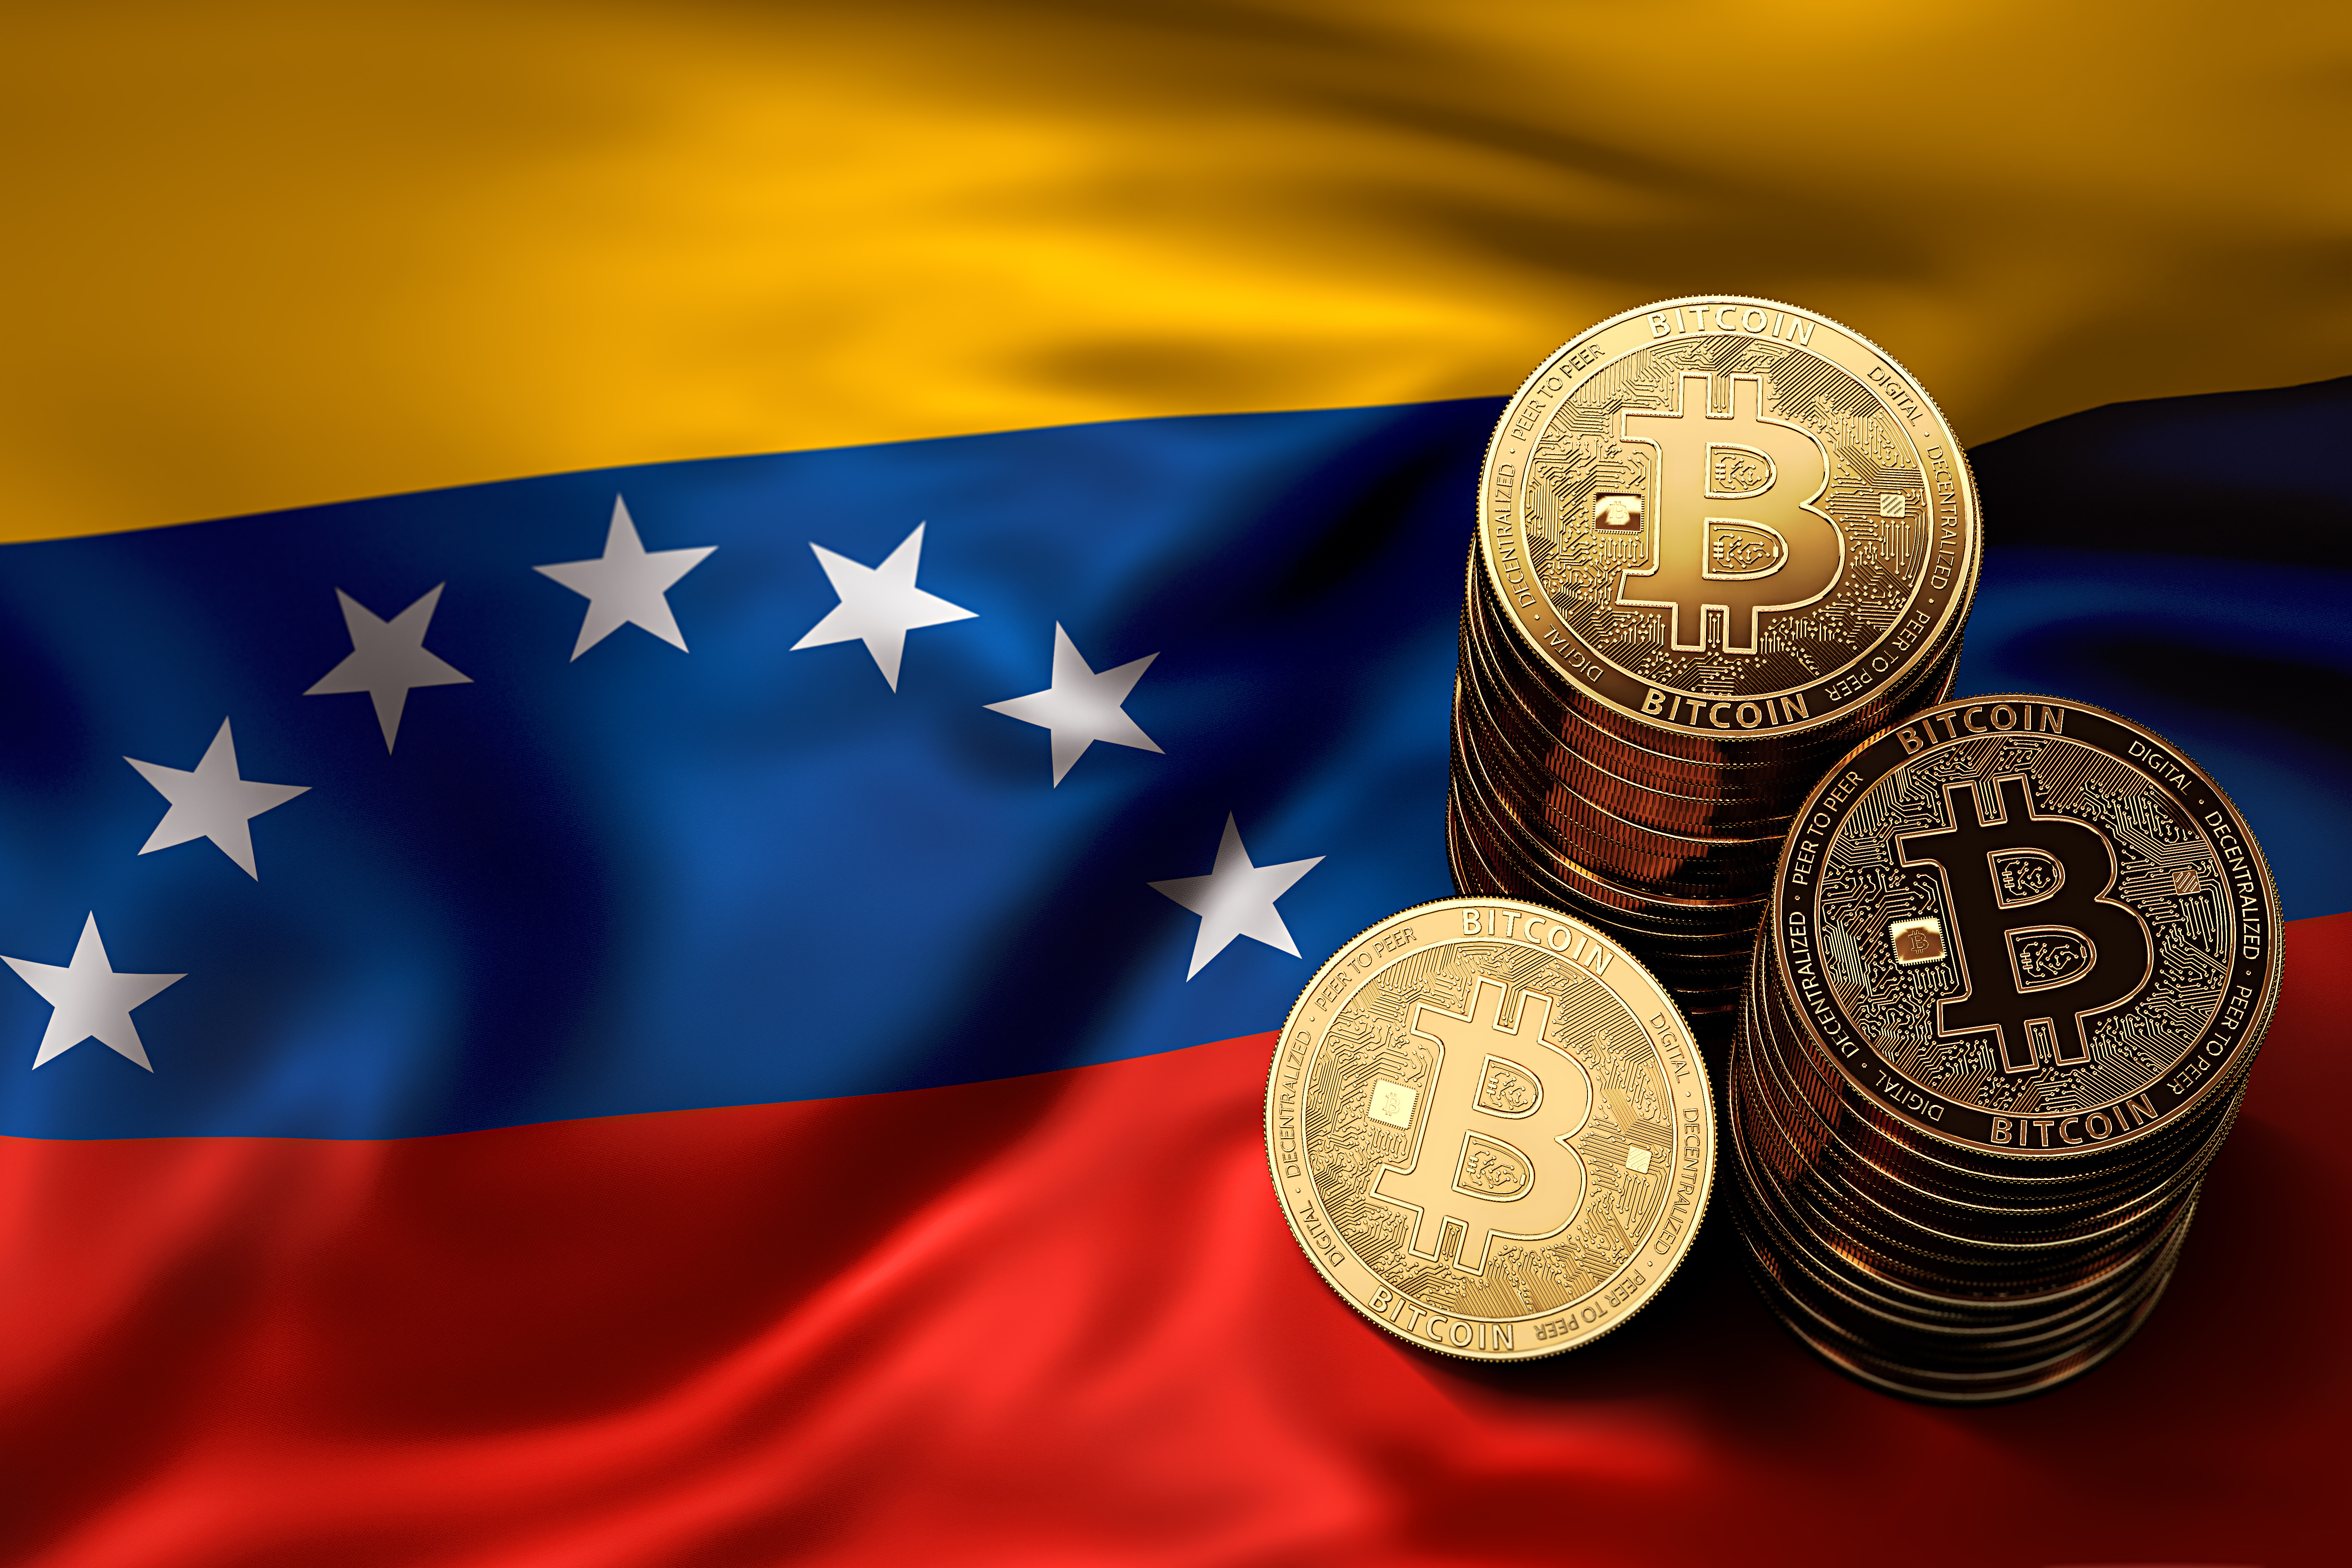 Venezuela’s Most Expensive House Put up for Sale at $20m, Owner Will Accept Crypto